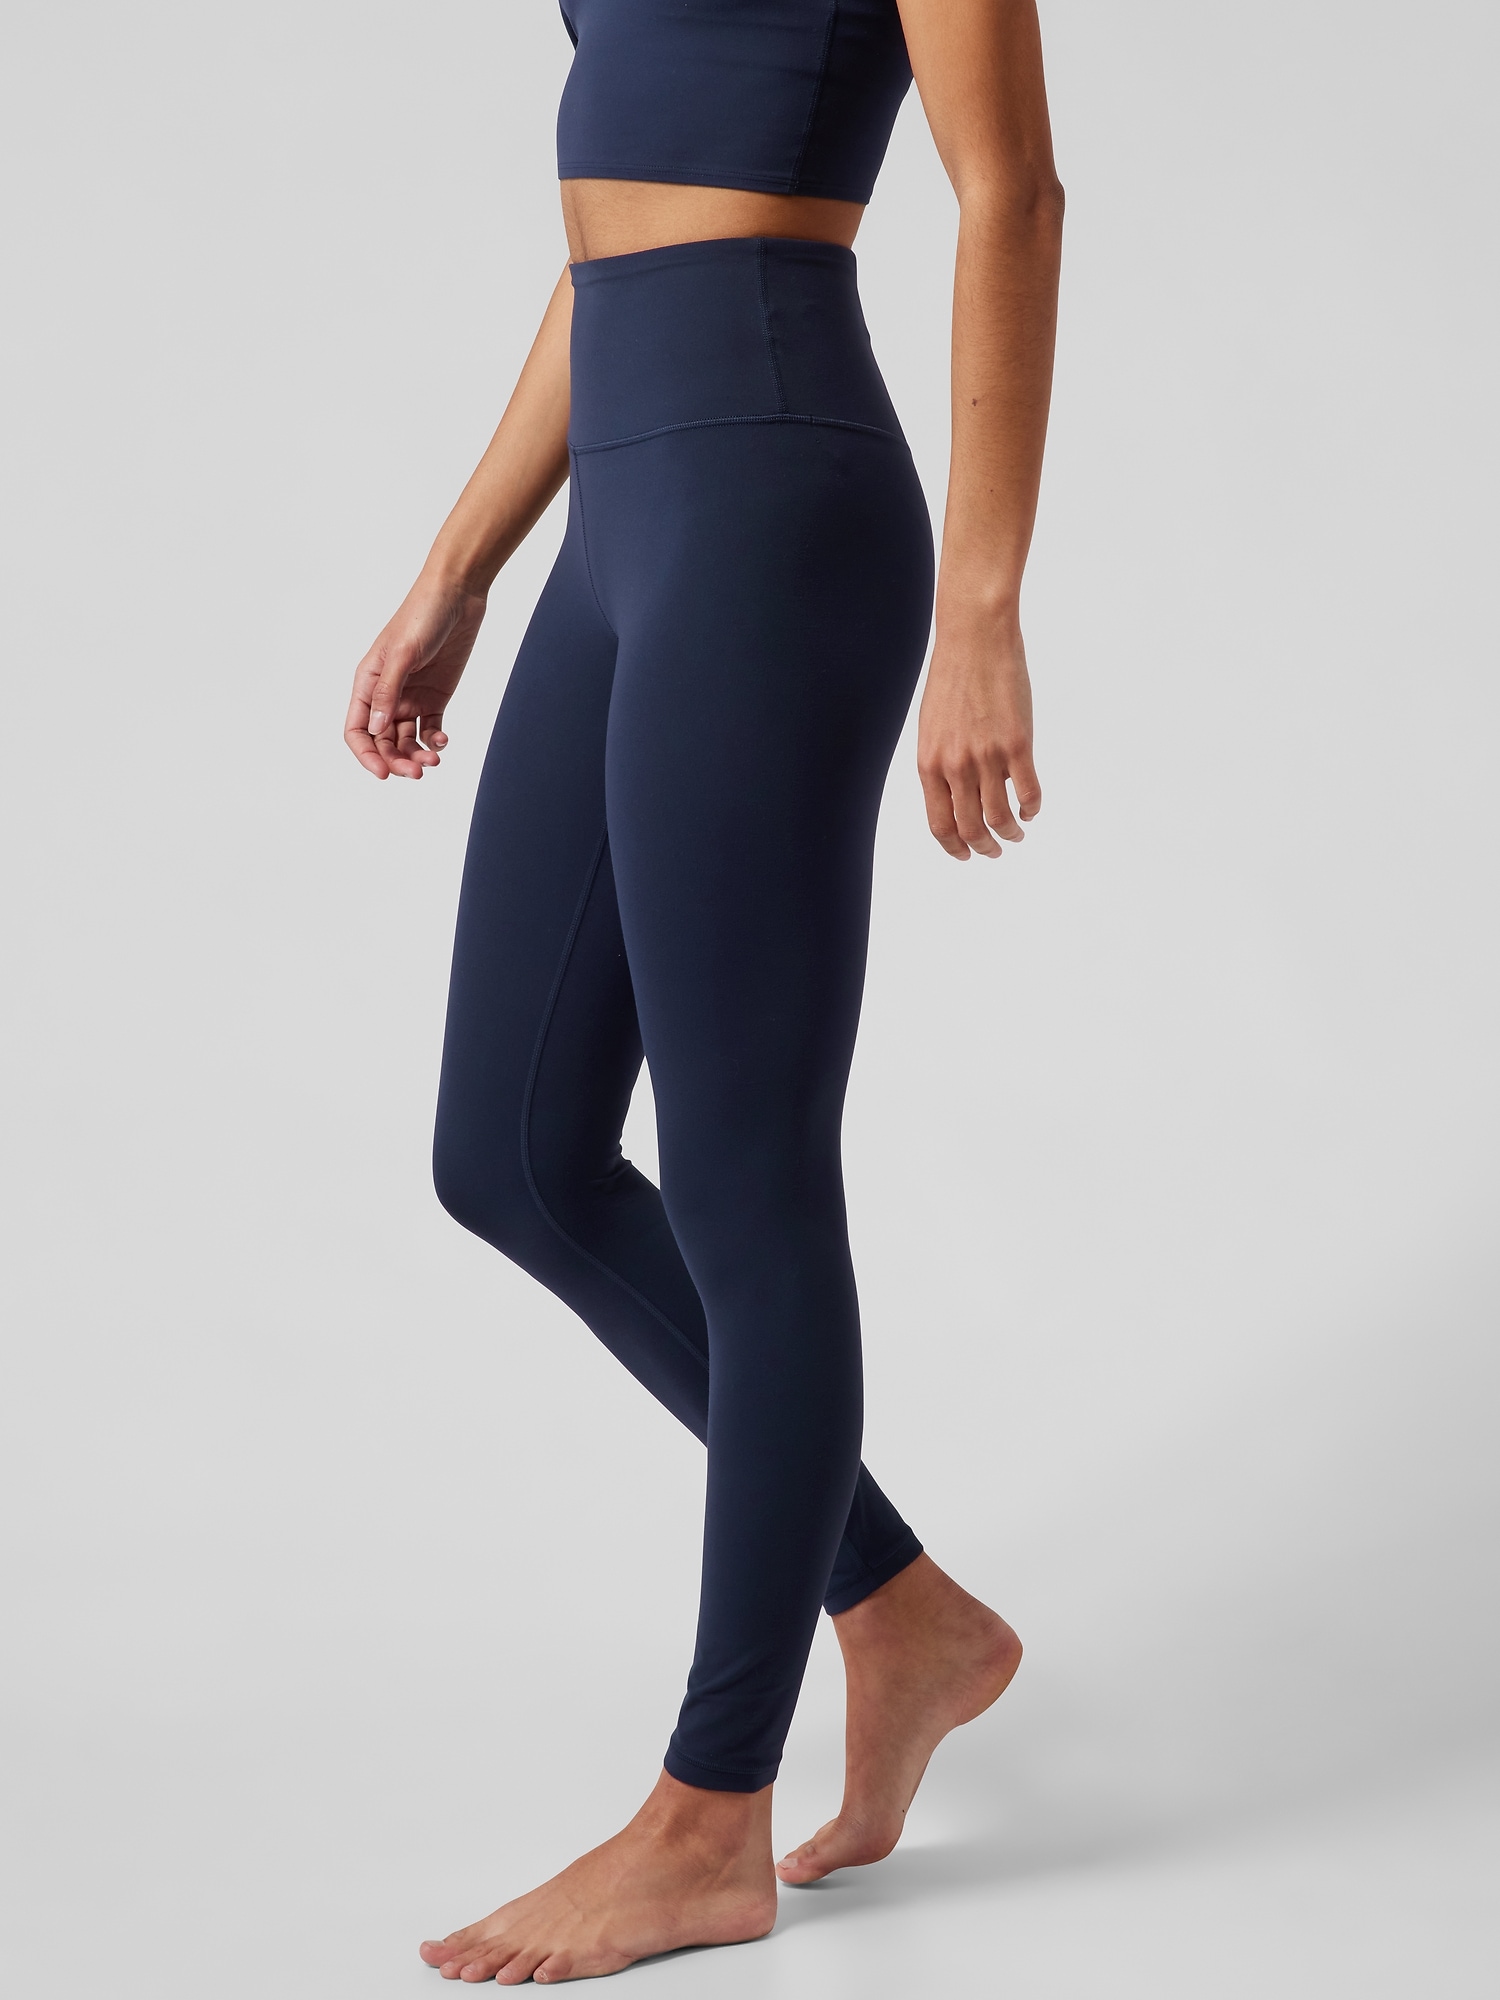 Details about   Athleta Power Up 7/8 Tight in Black Size XS 